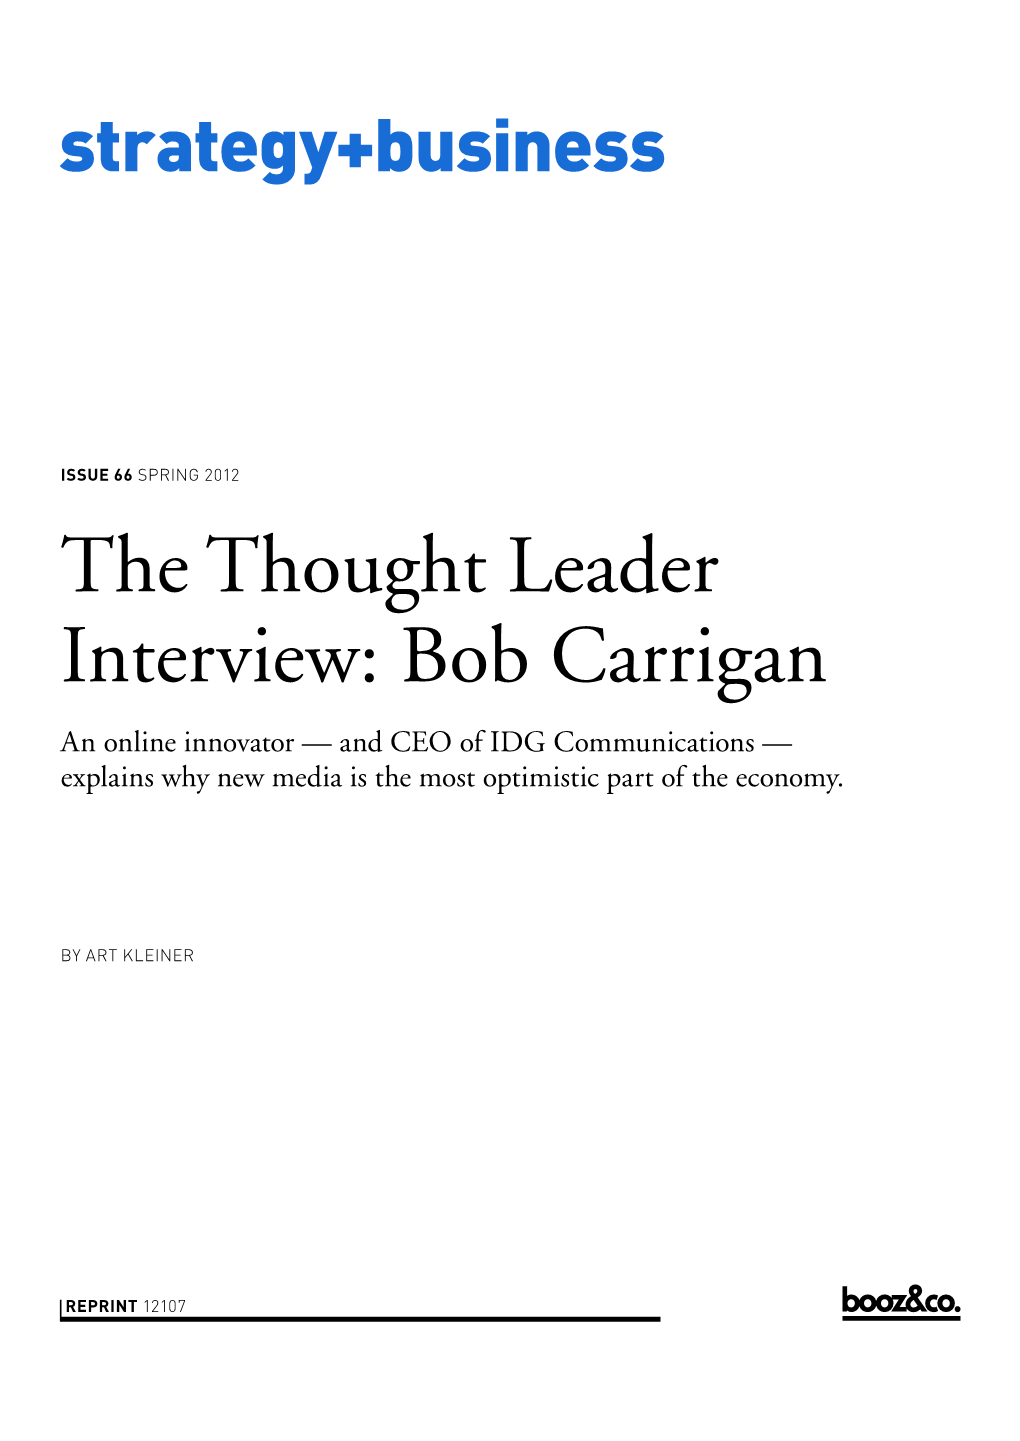 Bob Carrigan an Online Innovator — and CEO of IDG Communications — Explains Why New Media Is the Most Optimistic Part of the Economy